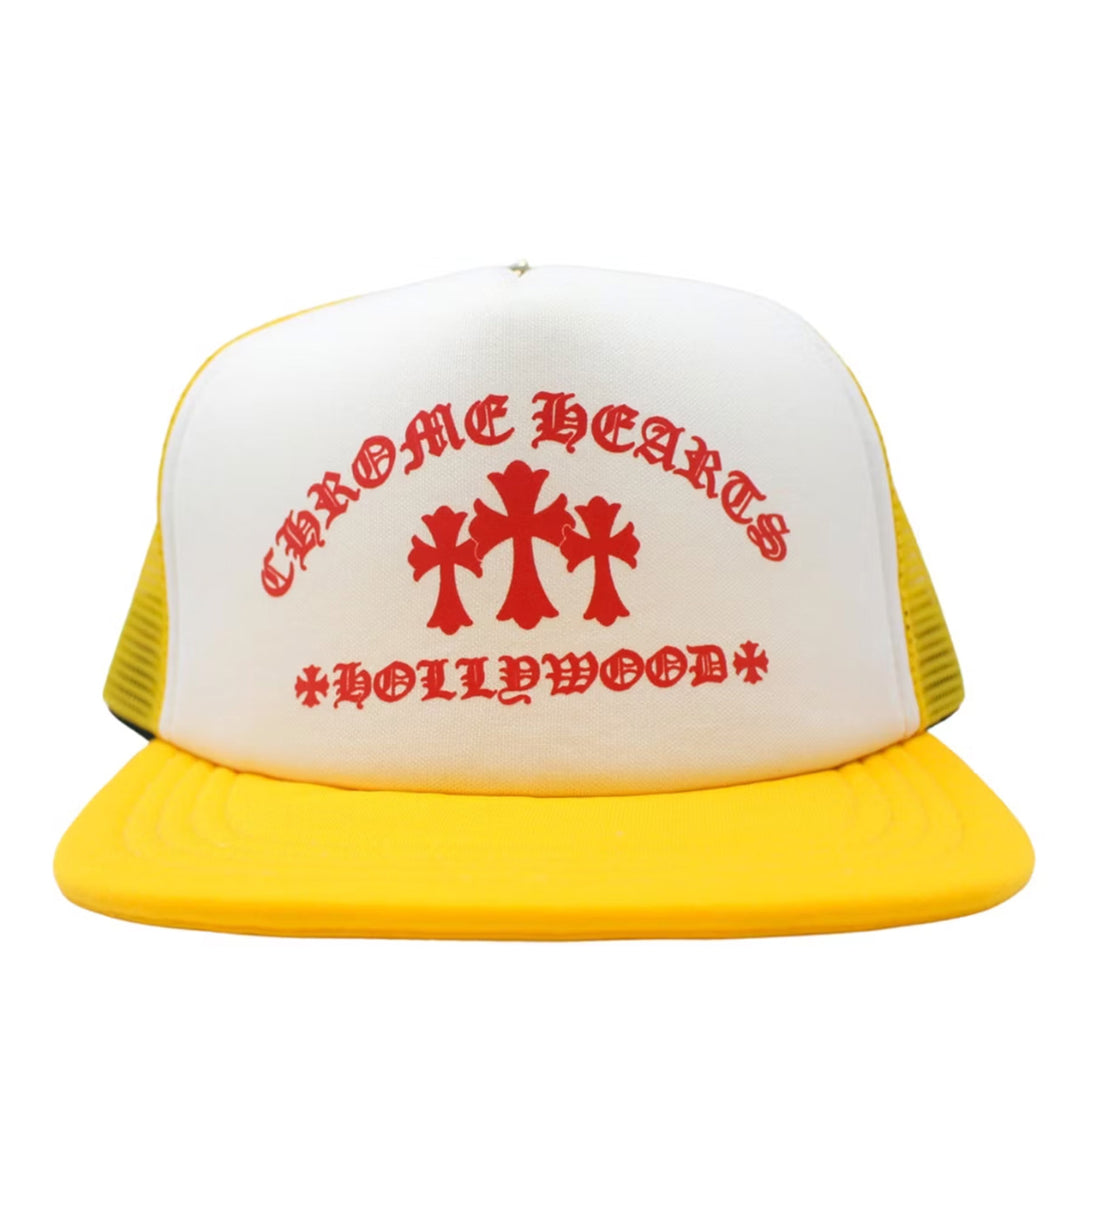 Chrome Hearts Yellow Trucker Cap Front View